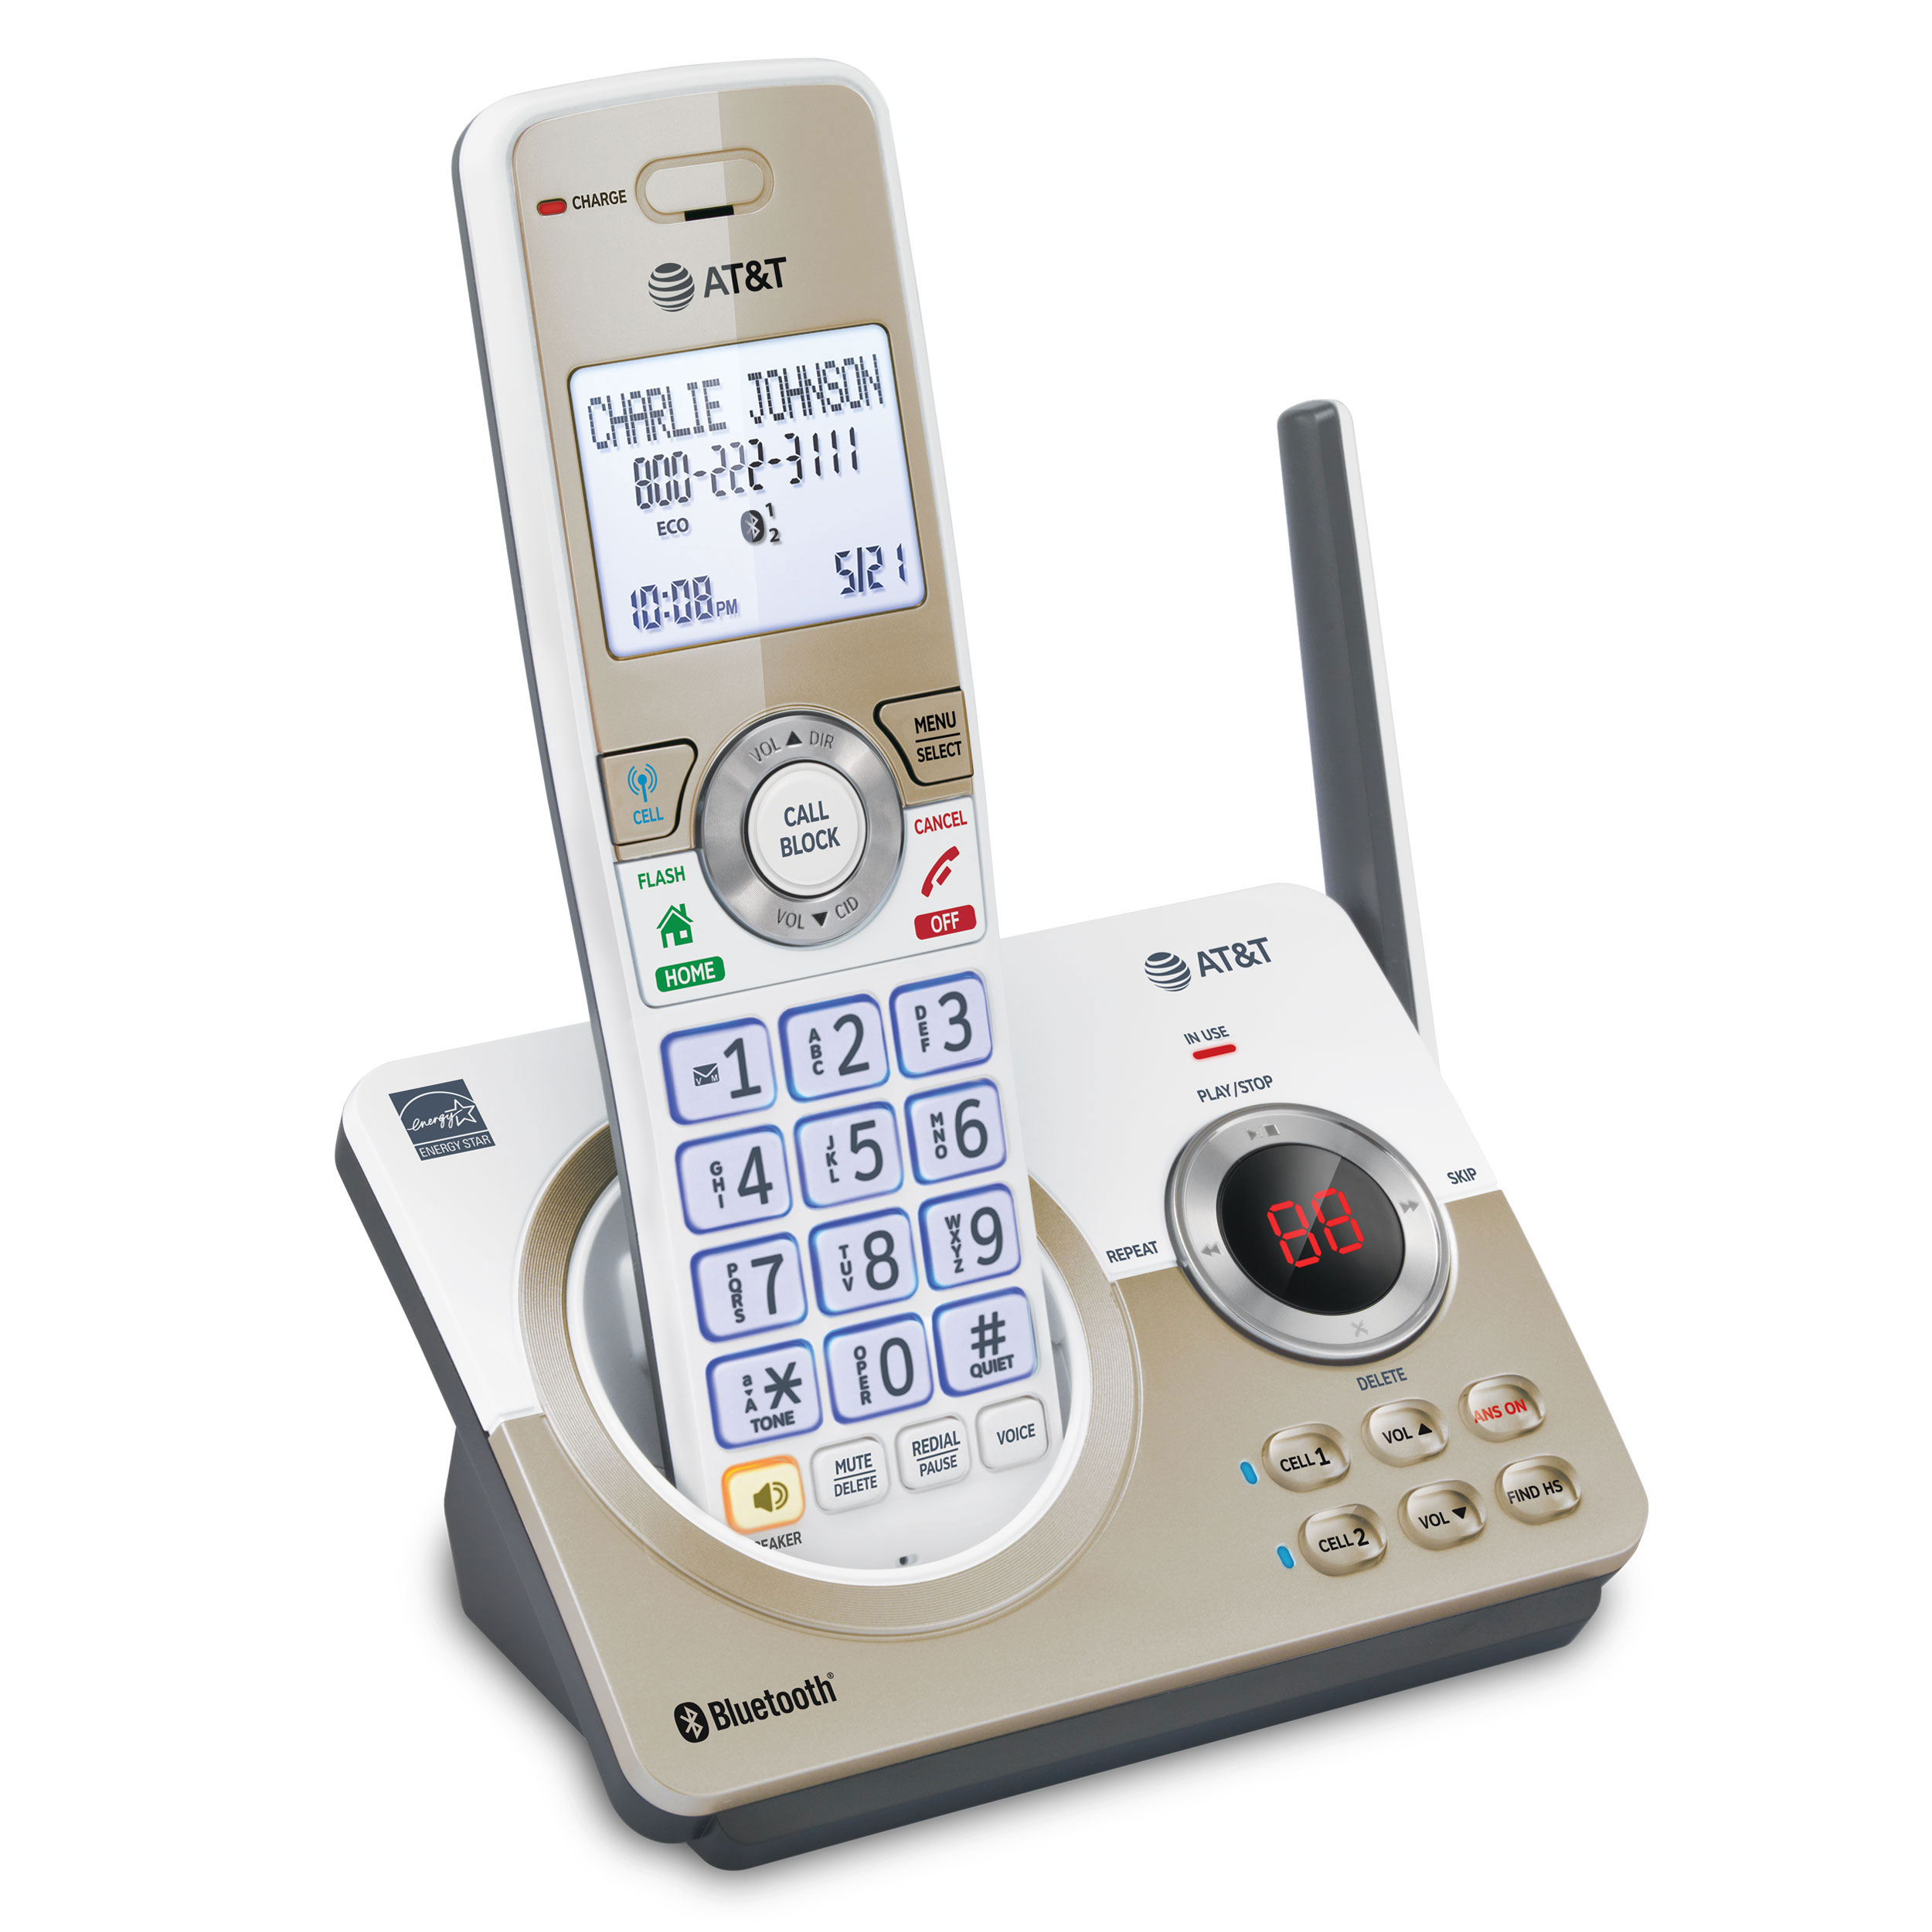 3-Handset Expandable Cordless Phone with Unsurpassed Range, Bluetooth Connect to Cell™, Smart Call Blocker and Answering System - view 2